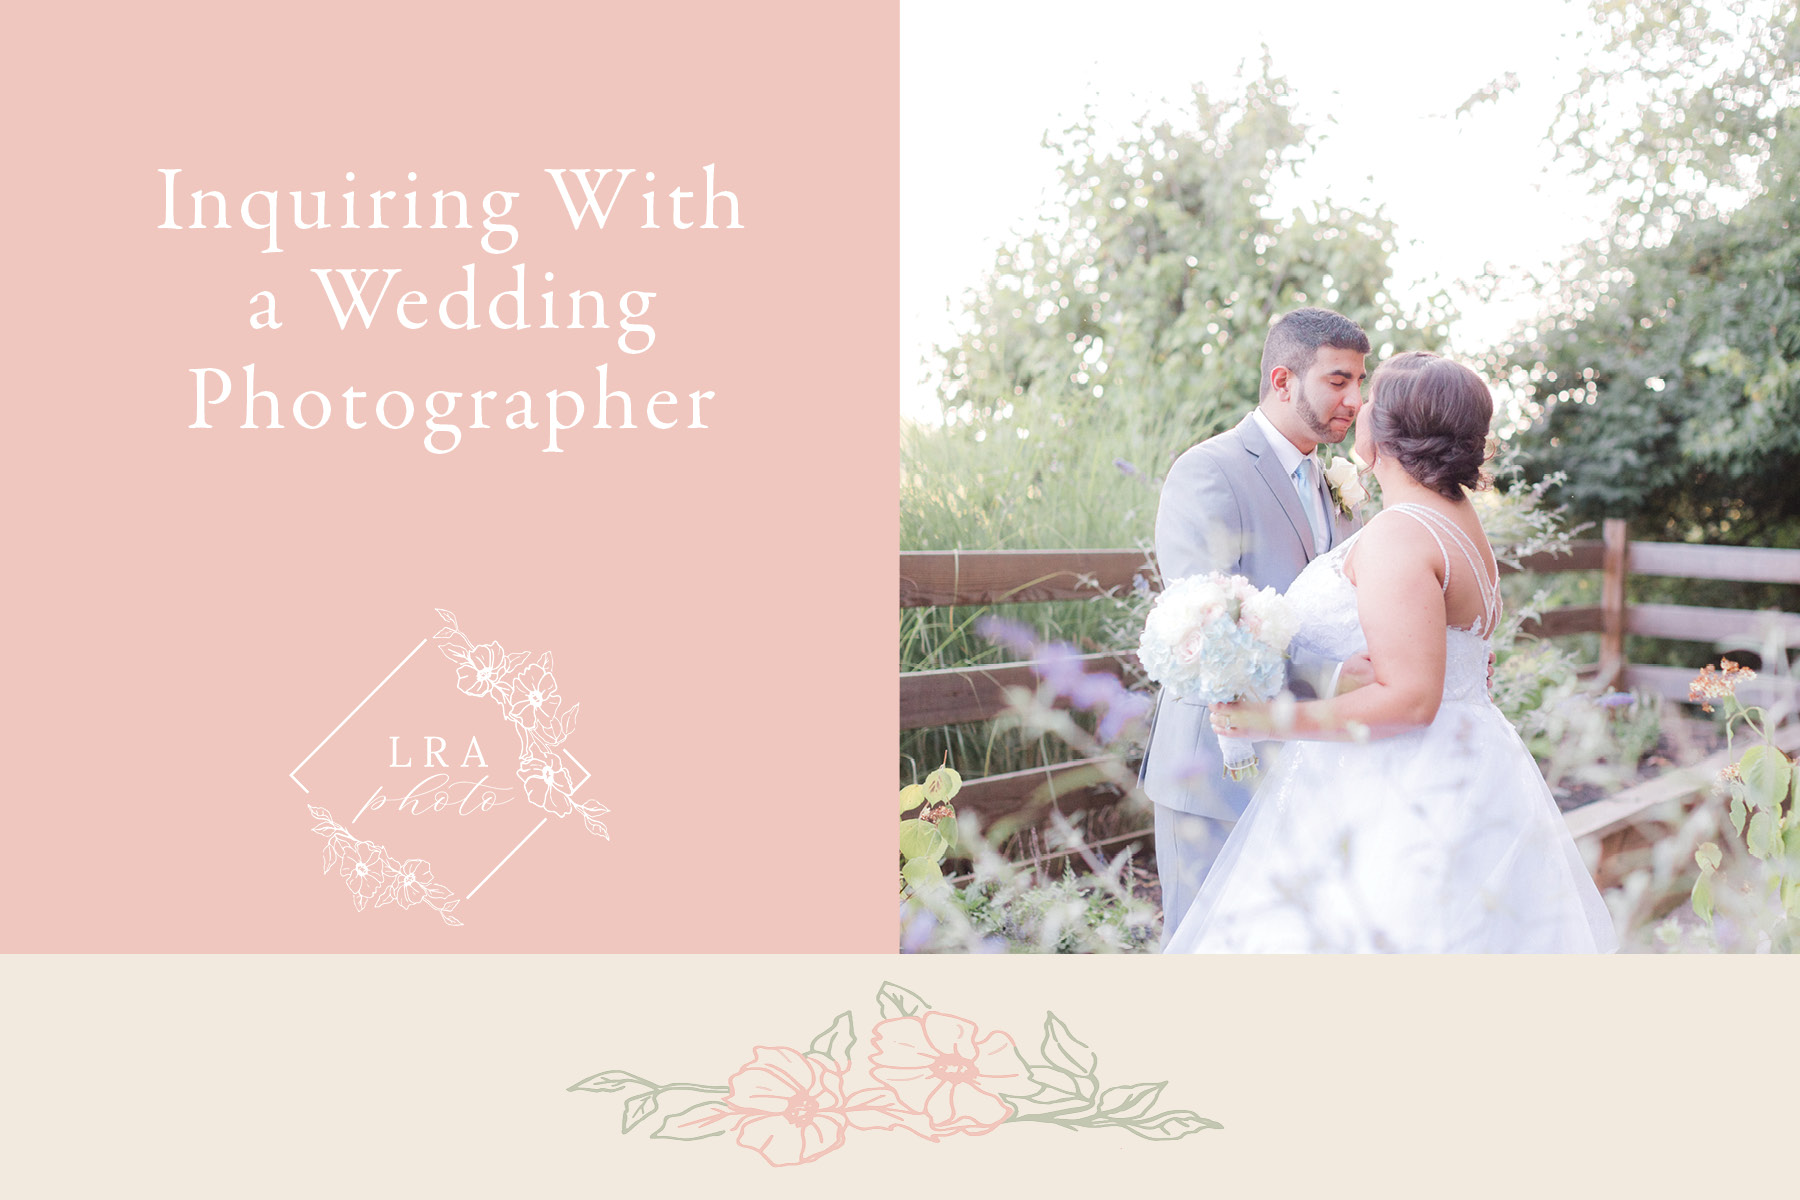 Inquiring With a Wedding Photographer